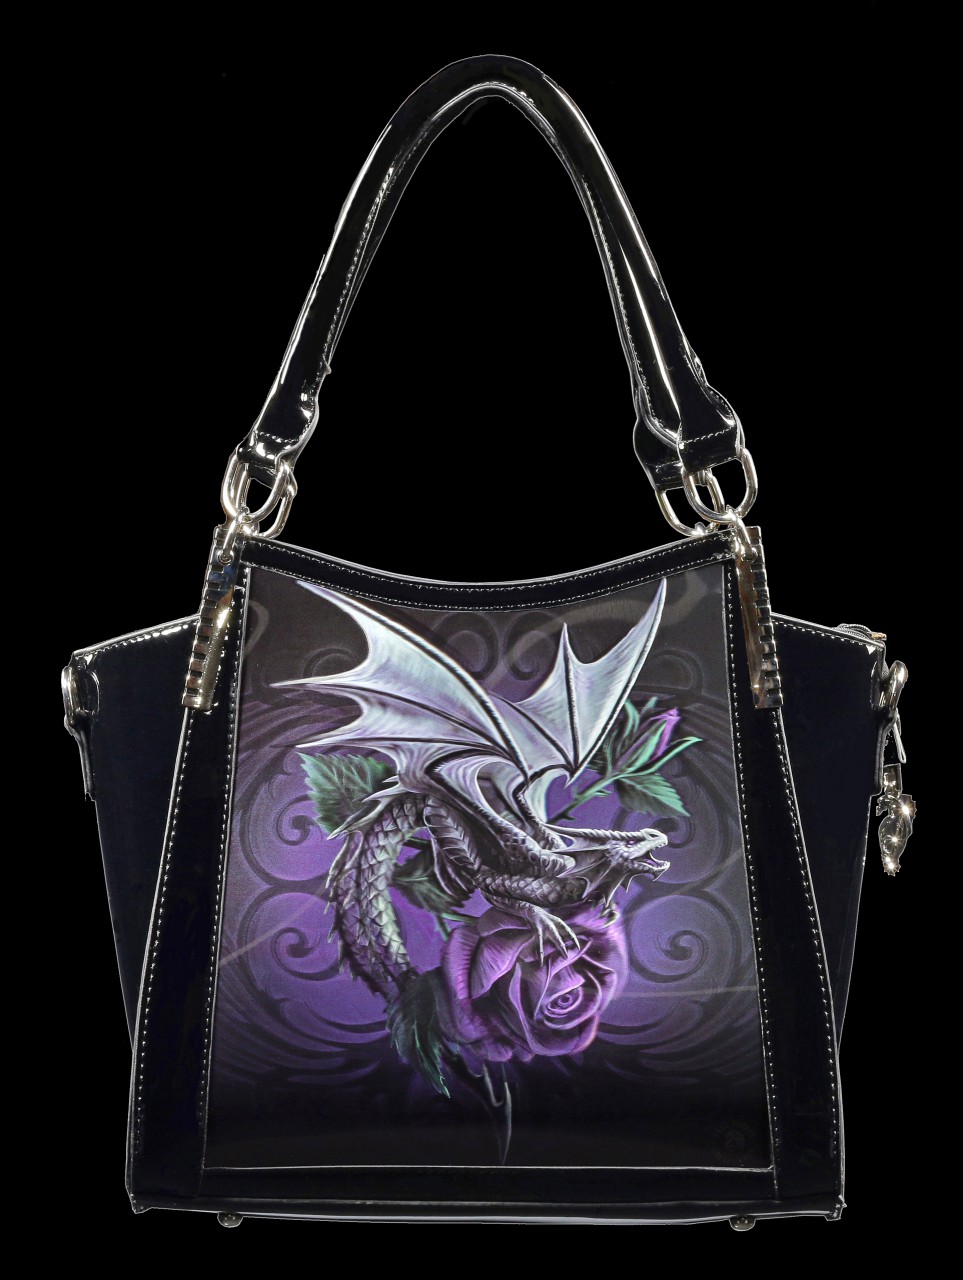 Fantasy Handbag with 3D Picture - Dragon Beauty